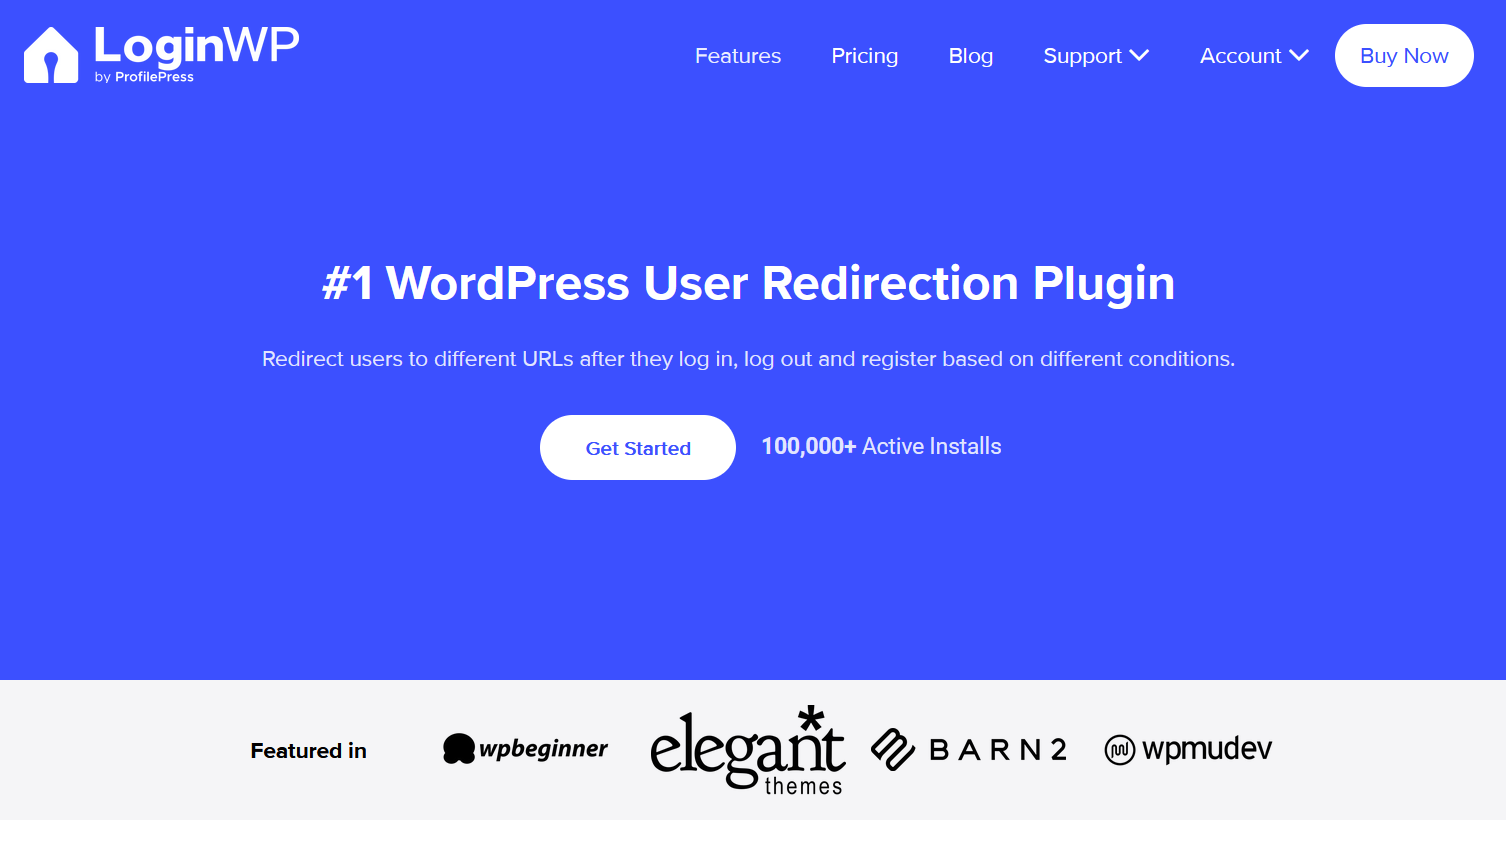 The WordPress login redirect plugin LoginWP allows you to redirect users to different URLs after they log in, log out, and register.